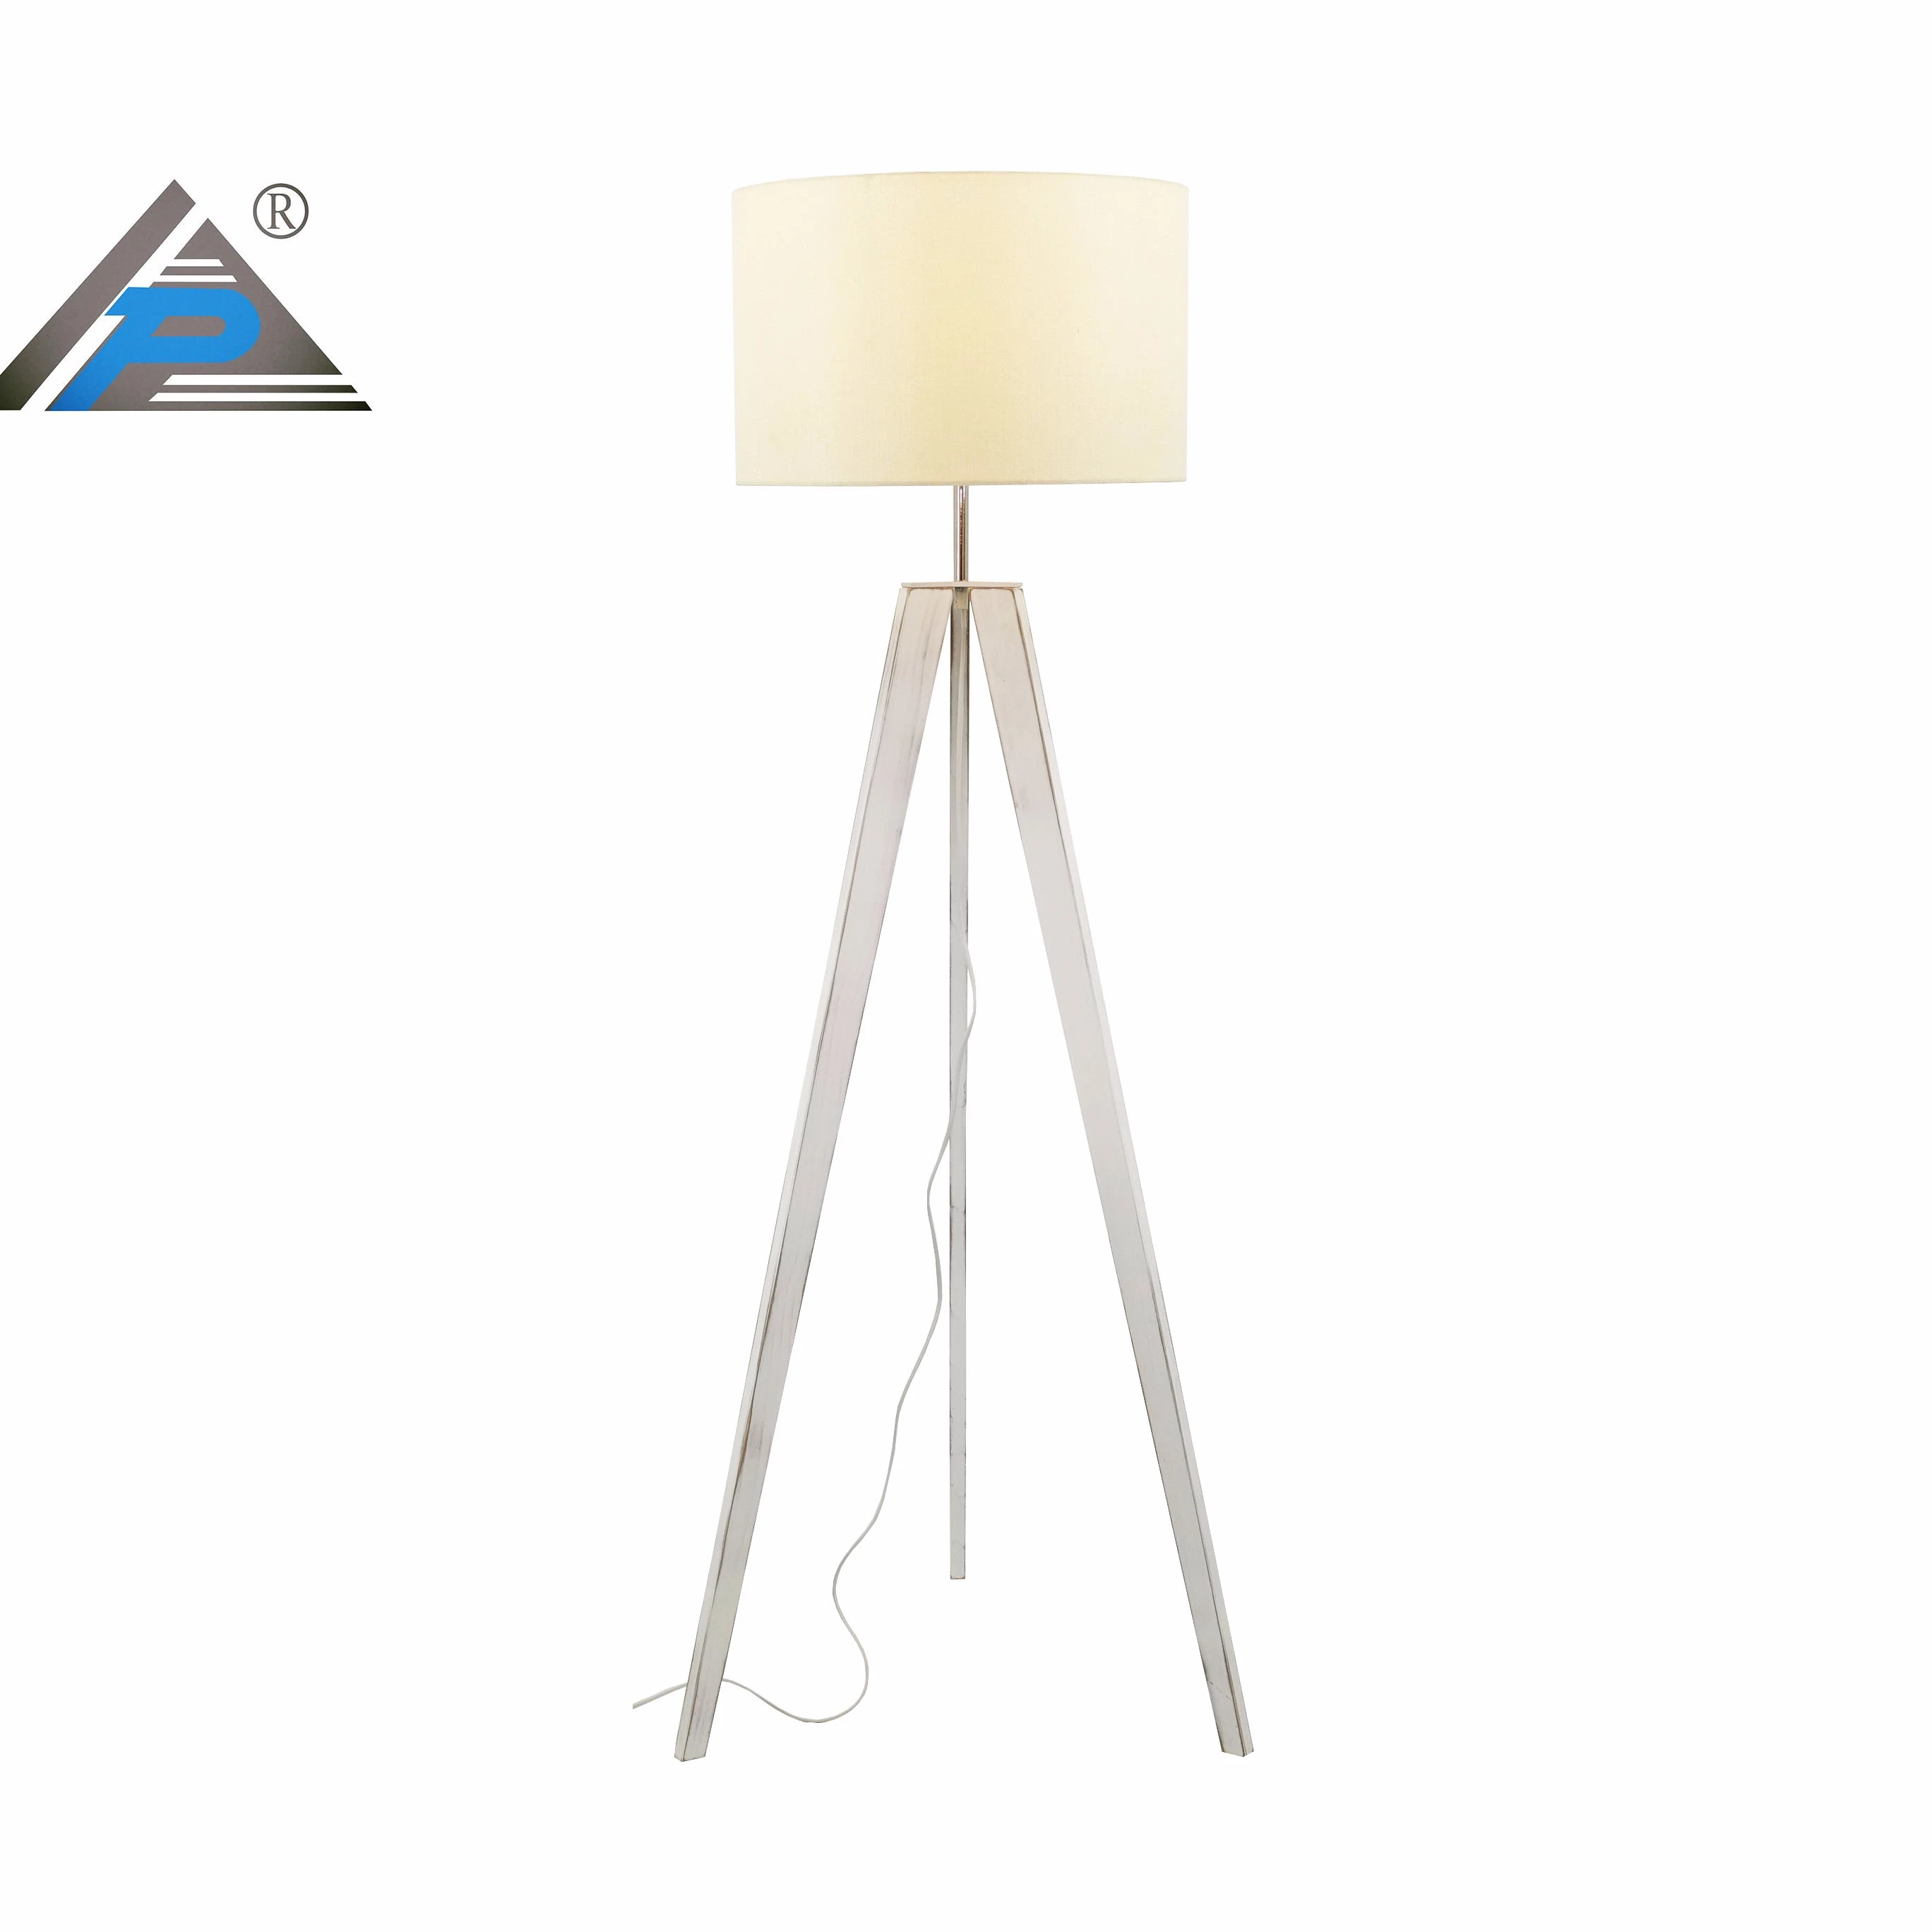 Vintage Retro Wood Tripod Floor Lamp with Fabric Shade with Faded White Vintage Look